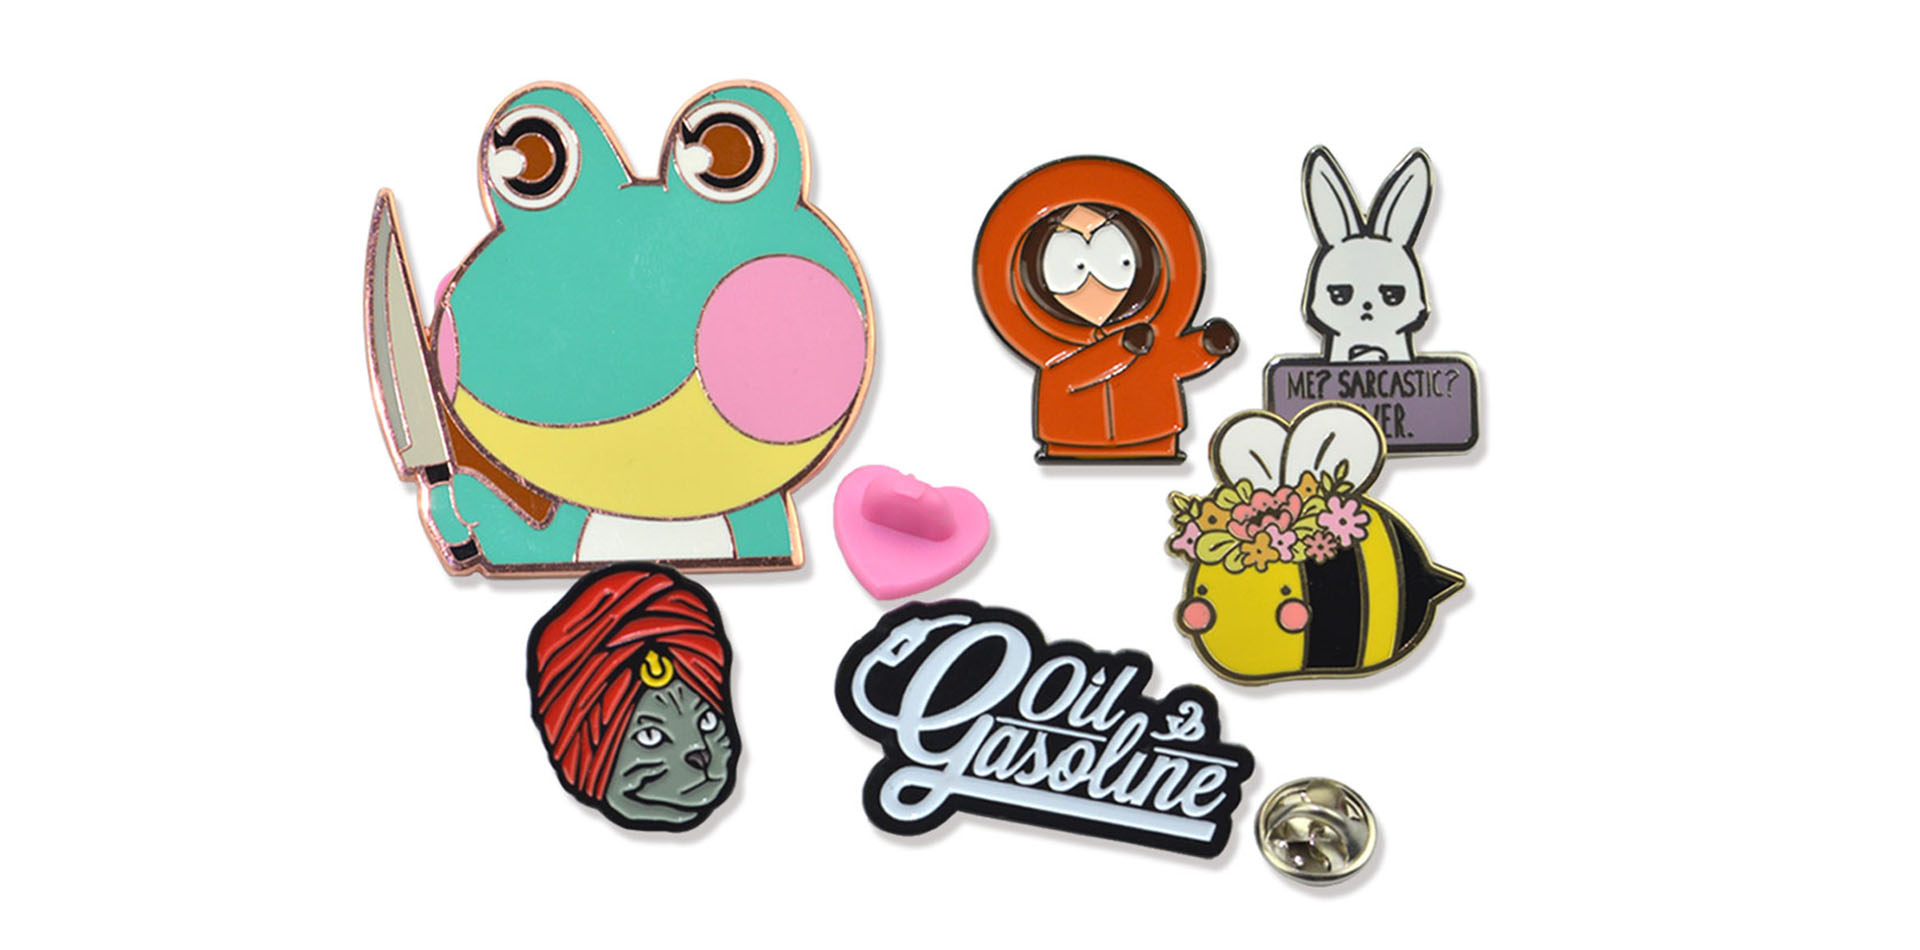 ArtiGifts ： Make a Statement with Custom Badges of Various Techniques